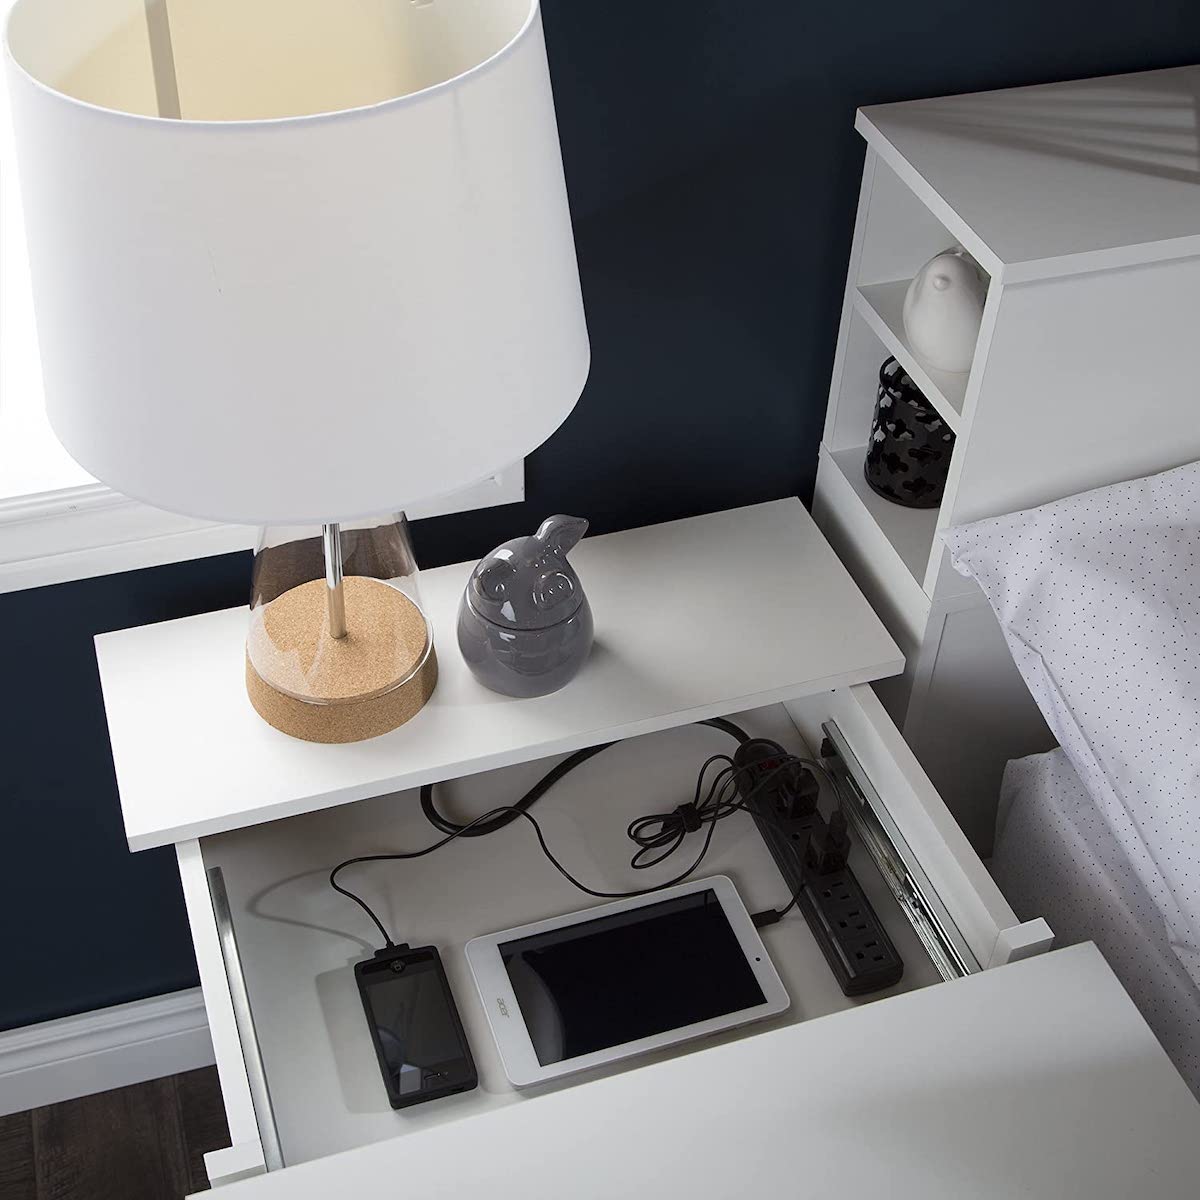 White nightstand with lamp on top; open nightstand drawer reveals phone and tablet plugged into a power strip.